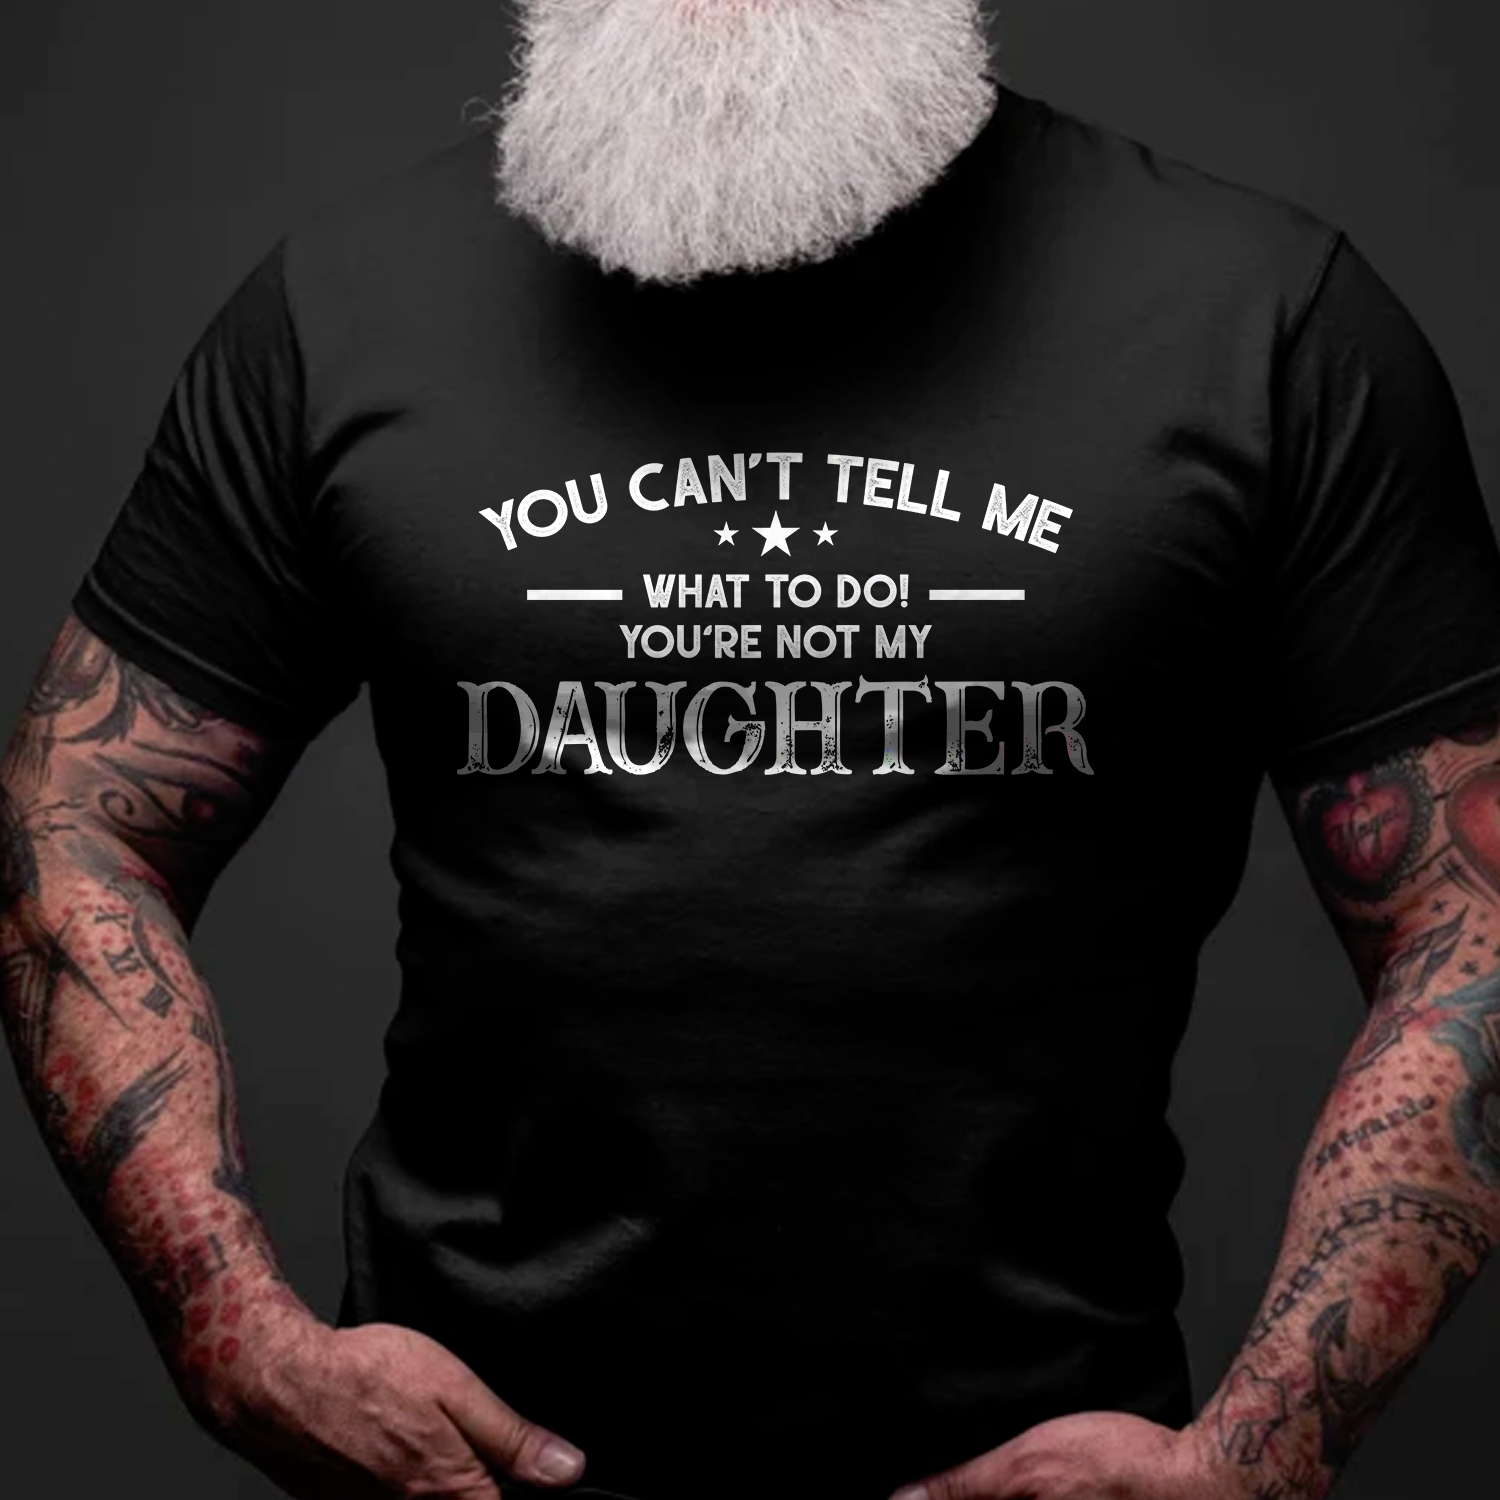 You can't tell me what to do you're not my daughter